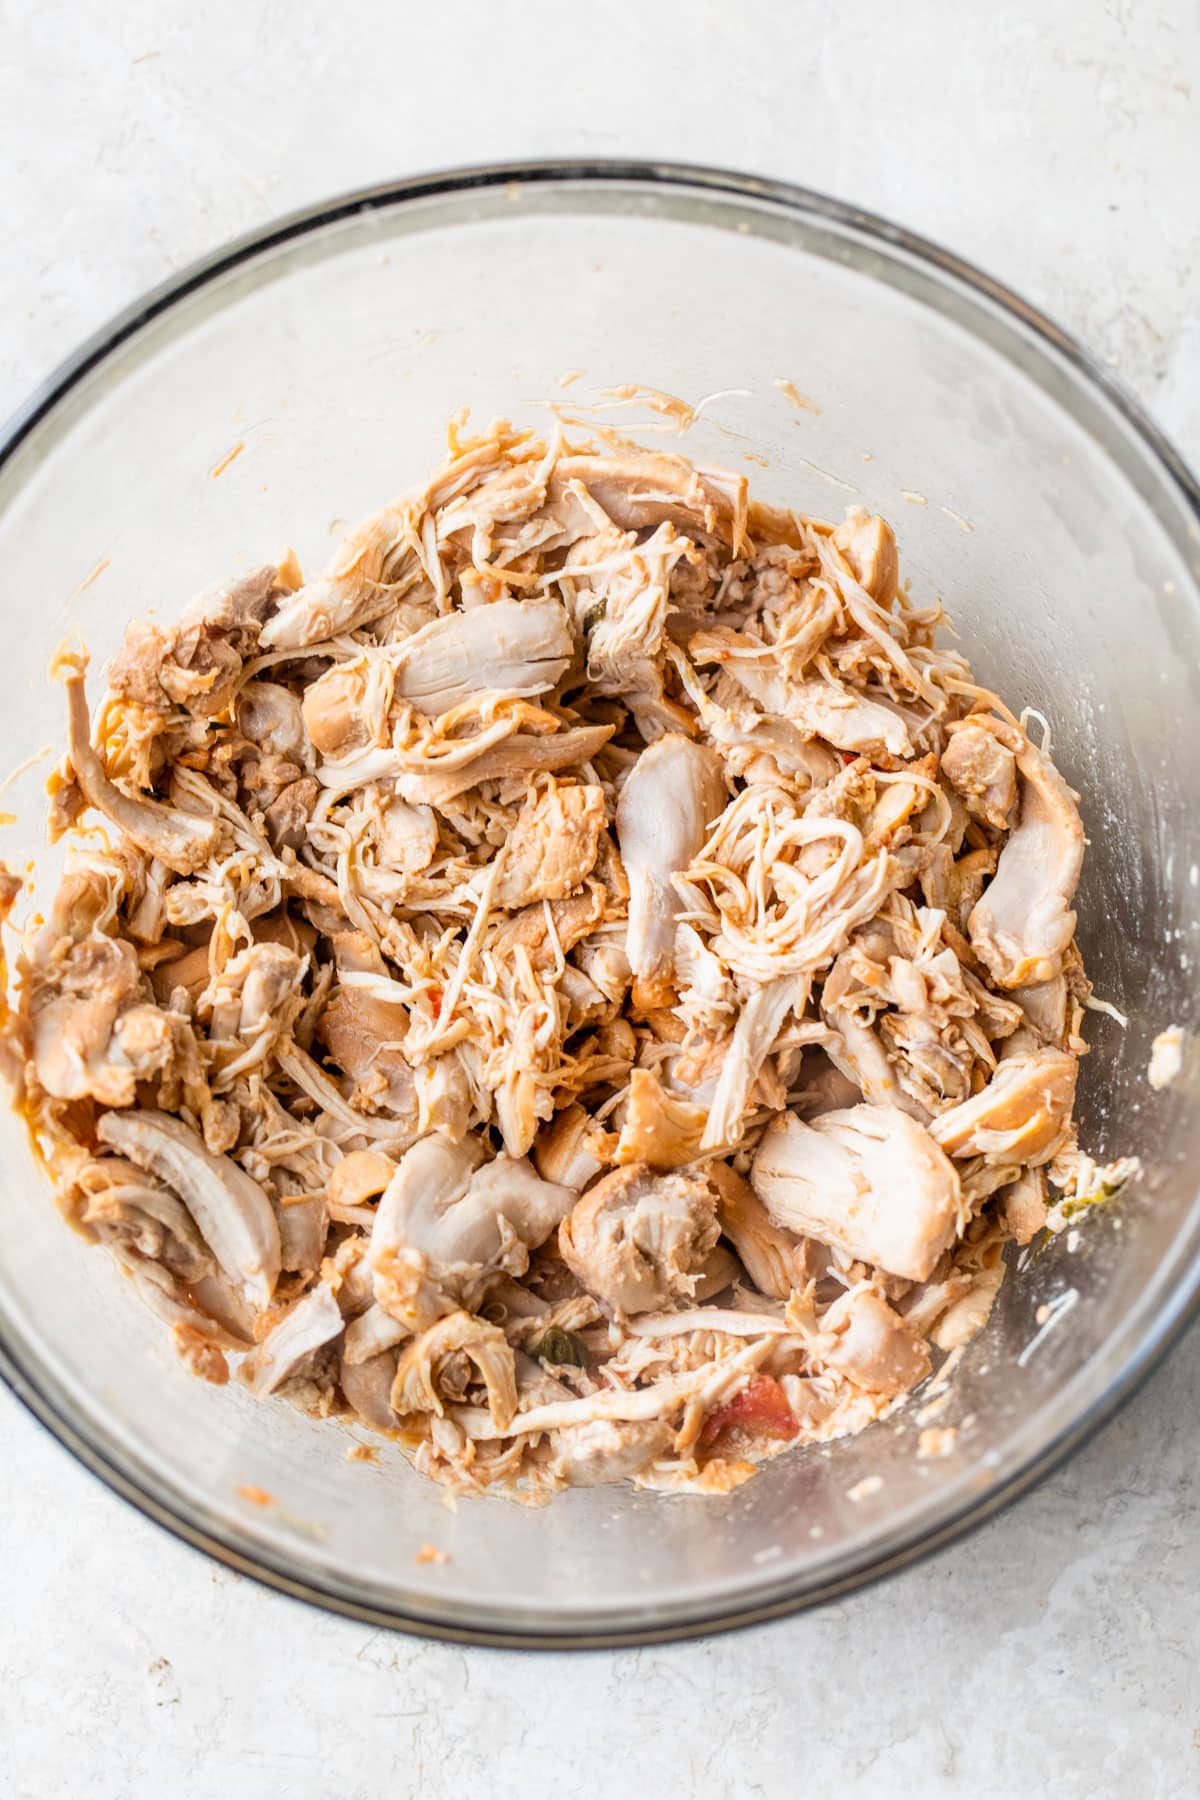 large glass bowl with shredded chicken